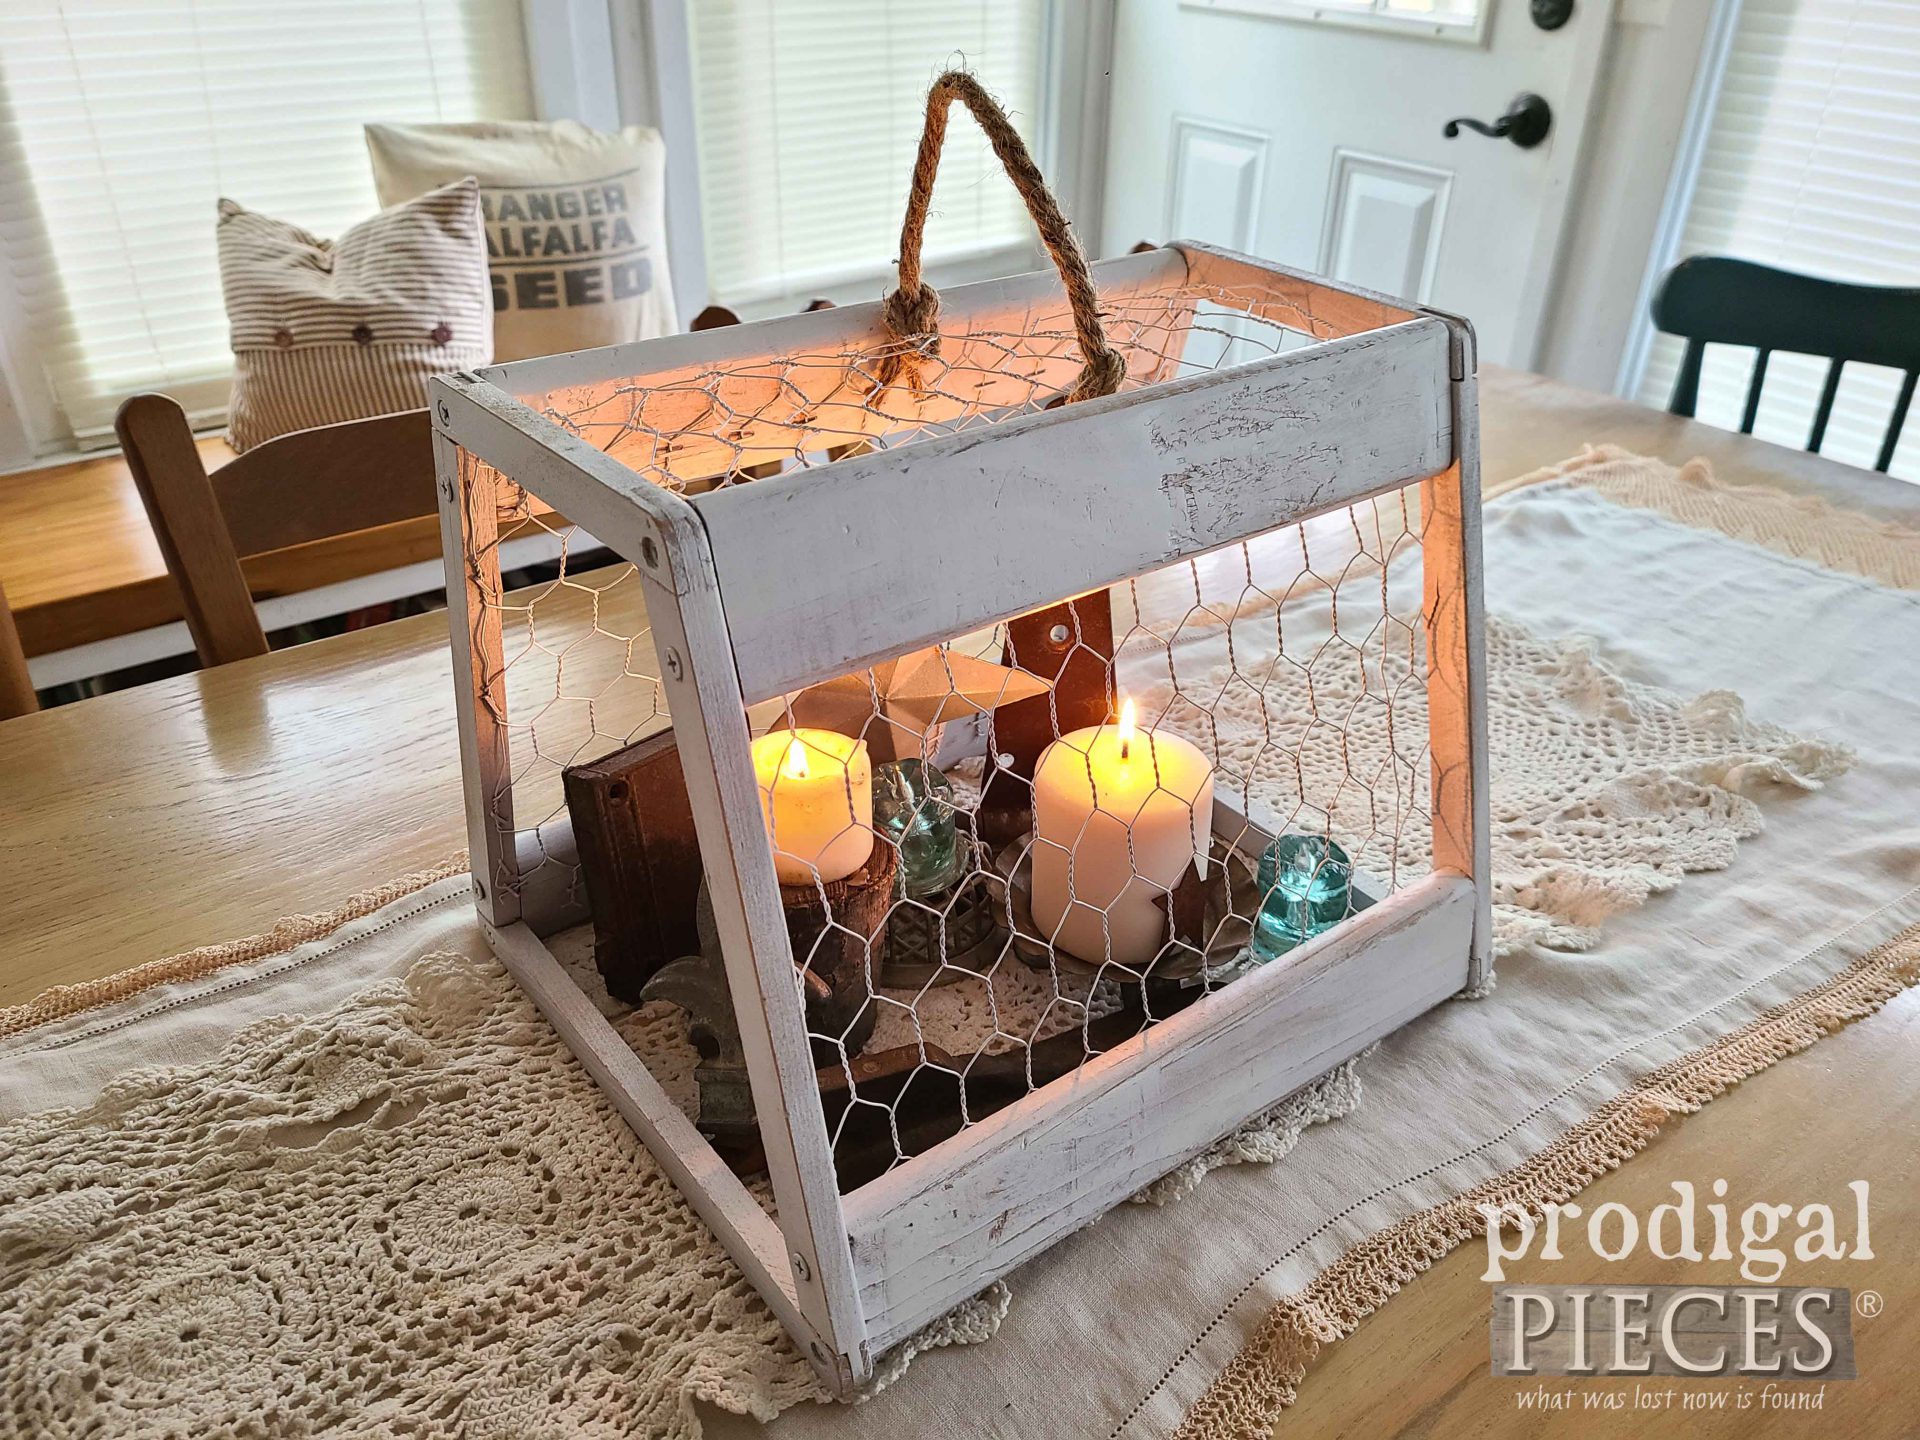 Rustic Farmhouse Decor Candle in Cloche by Larissa of Prodigal Pieces | prodigalpieces.com #prodigalpieces #rustic #handmade #farmhouse